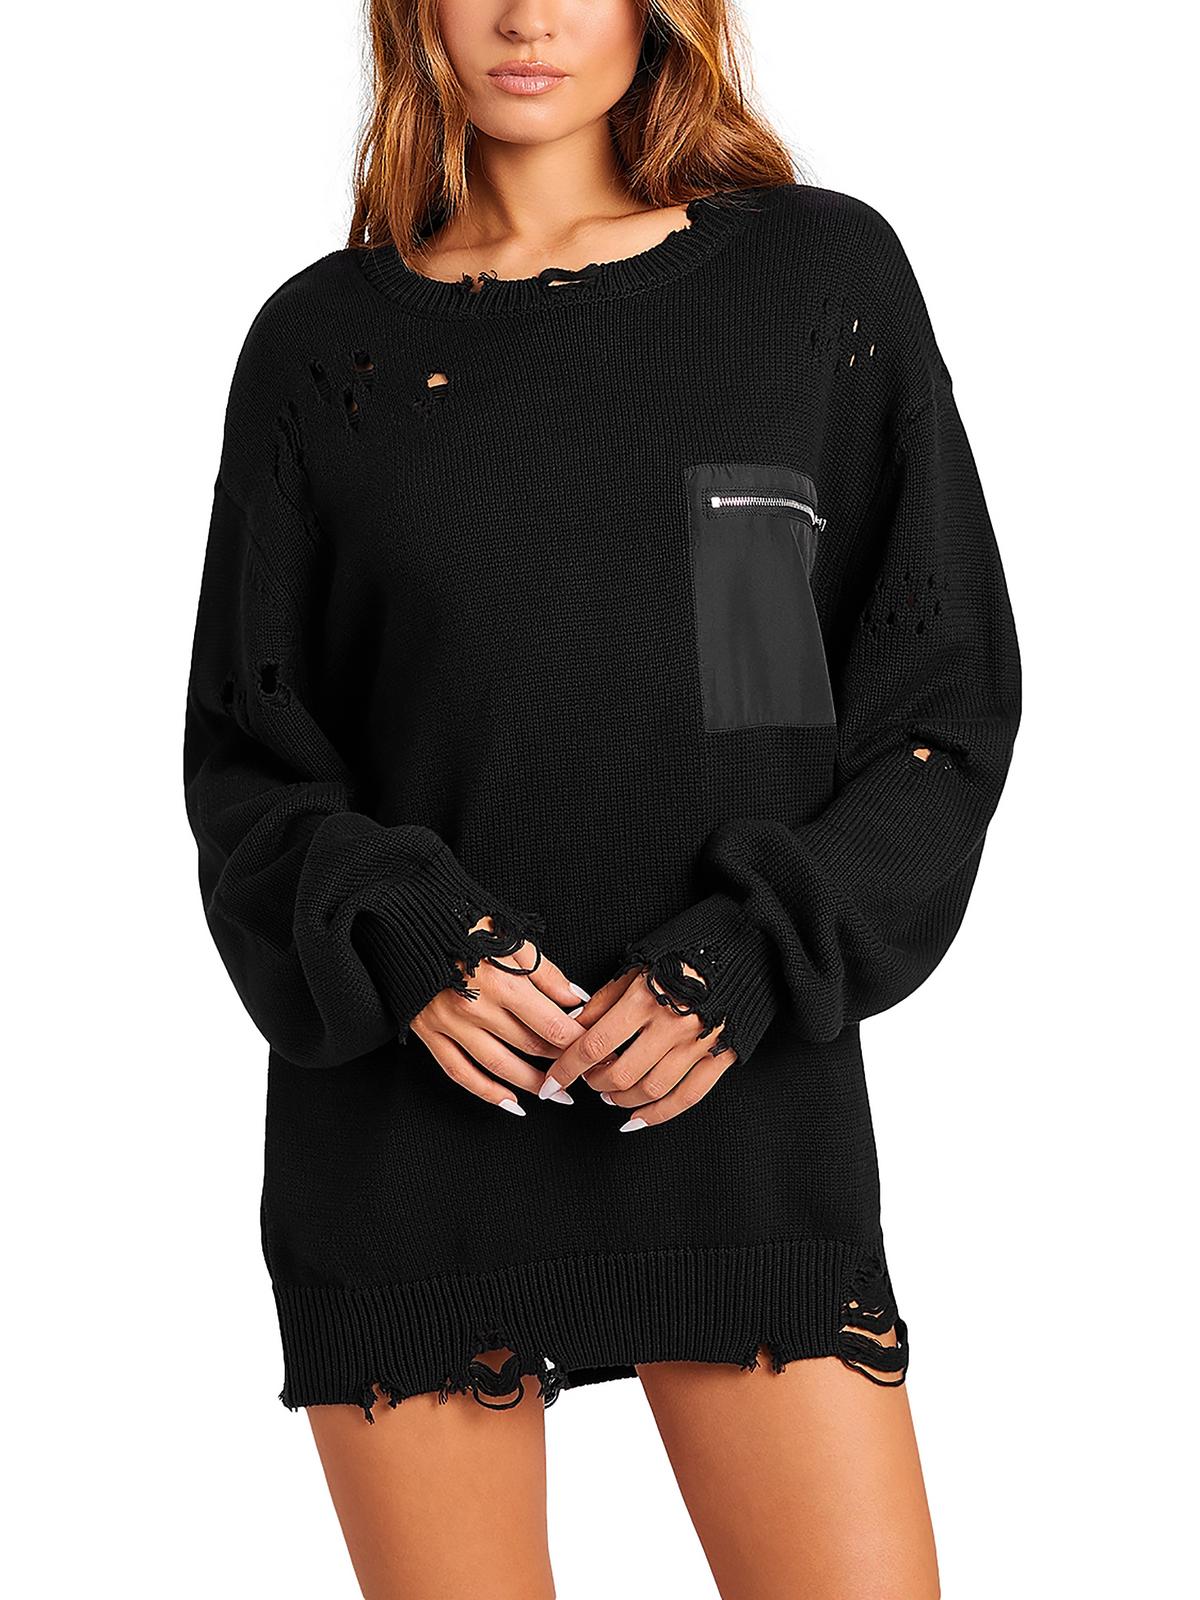 Ser.o.ya Womens Knit Distressed Pullover Sweater In Black